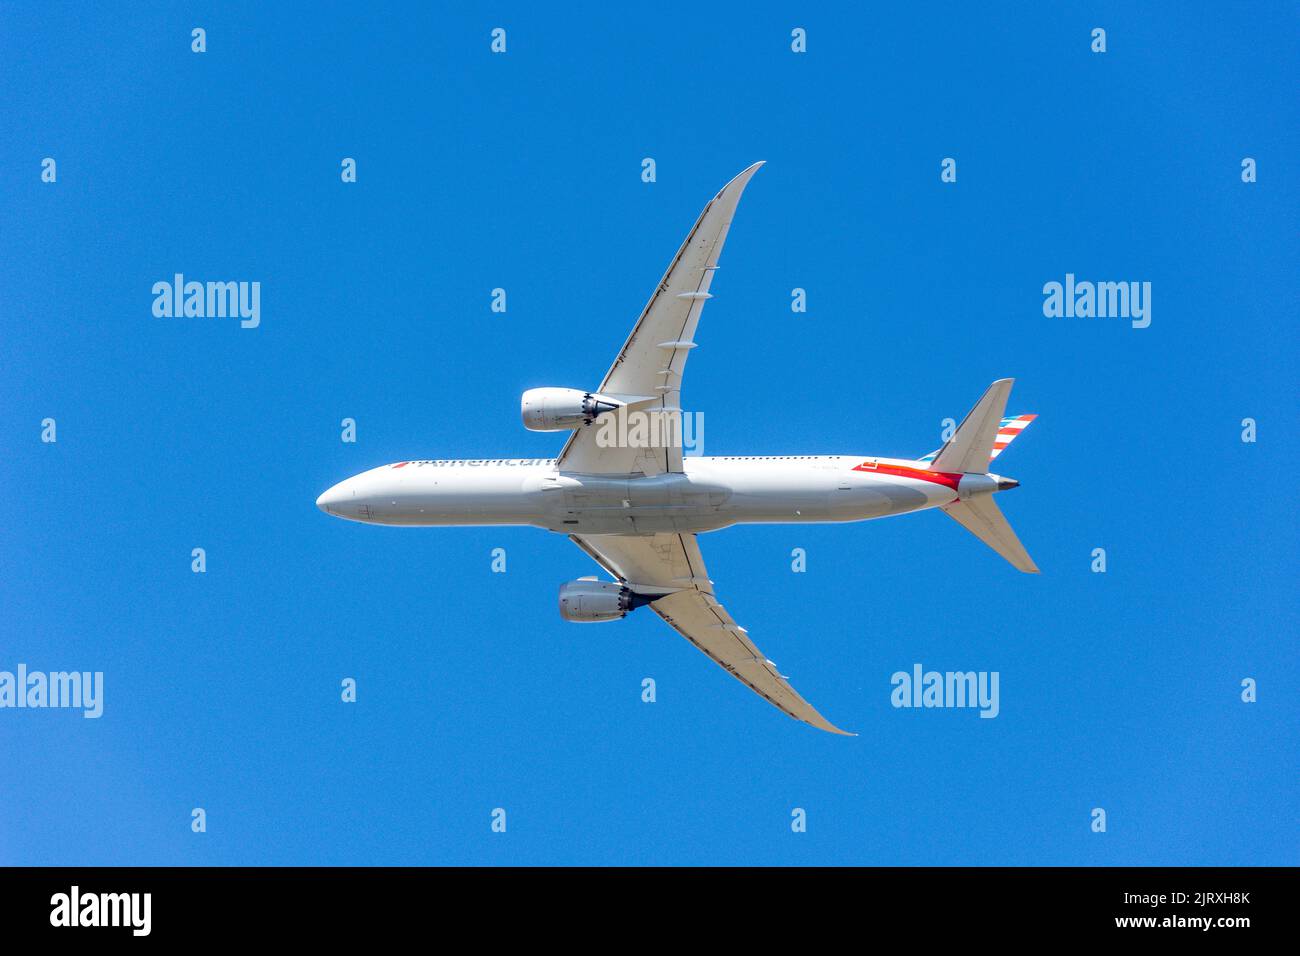 American Airlines Boeing 787-9 Dreamliner aircraft taking off from Heathrow Airport, Greater London, England, United Kingdom Stock Photo